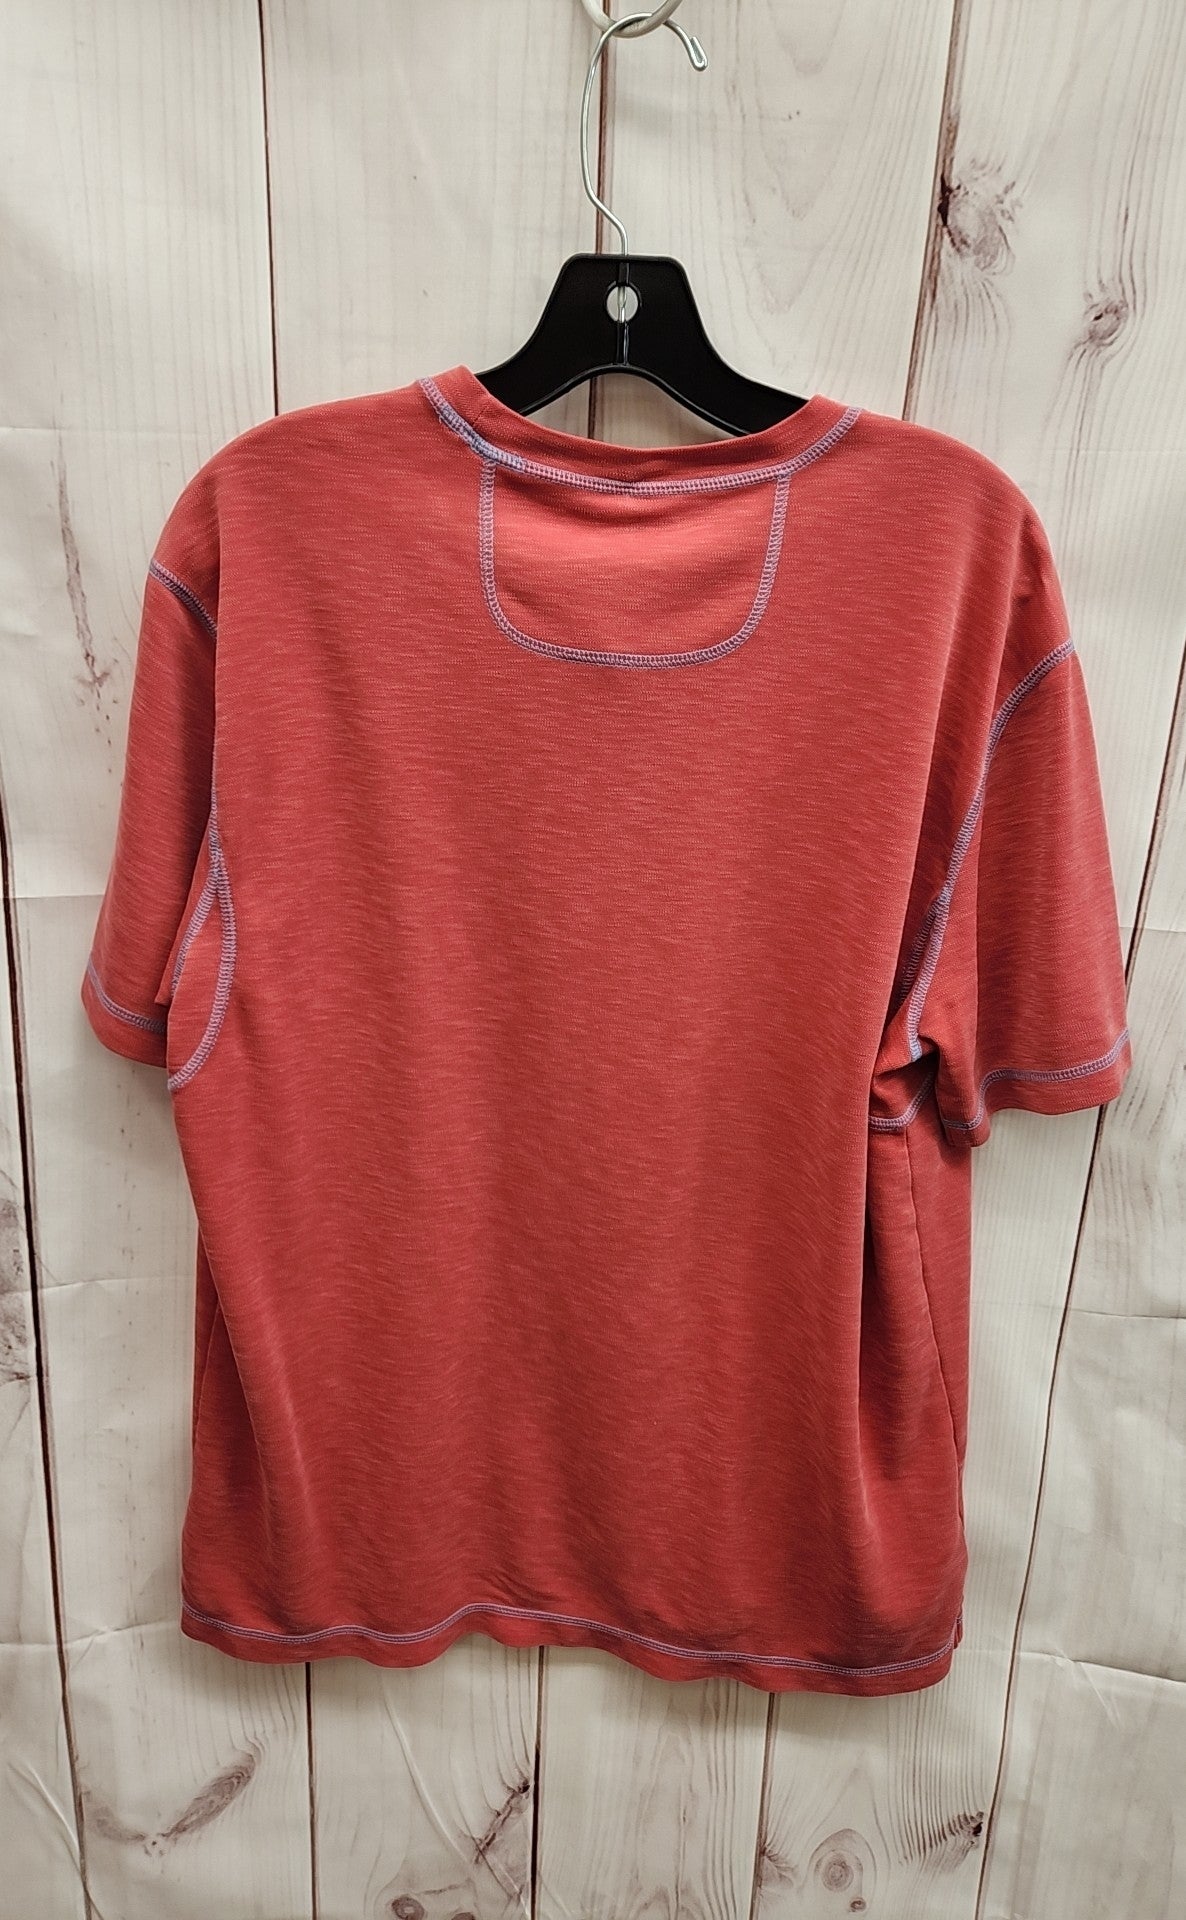 Tommy Bahama Men's Size M Red Shirt